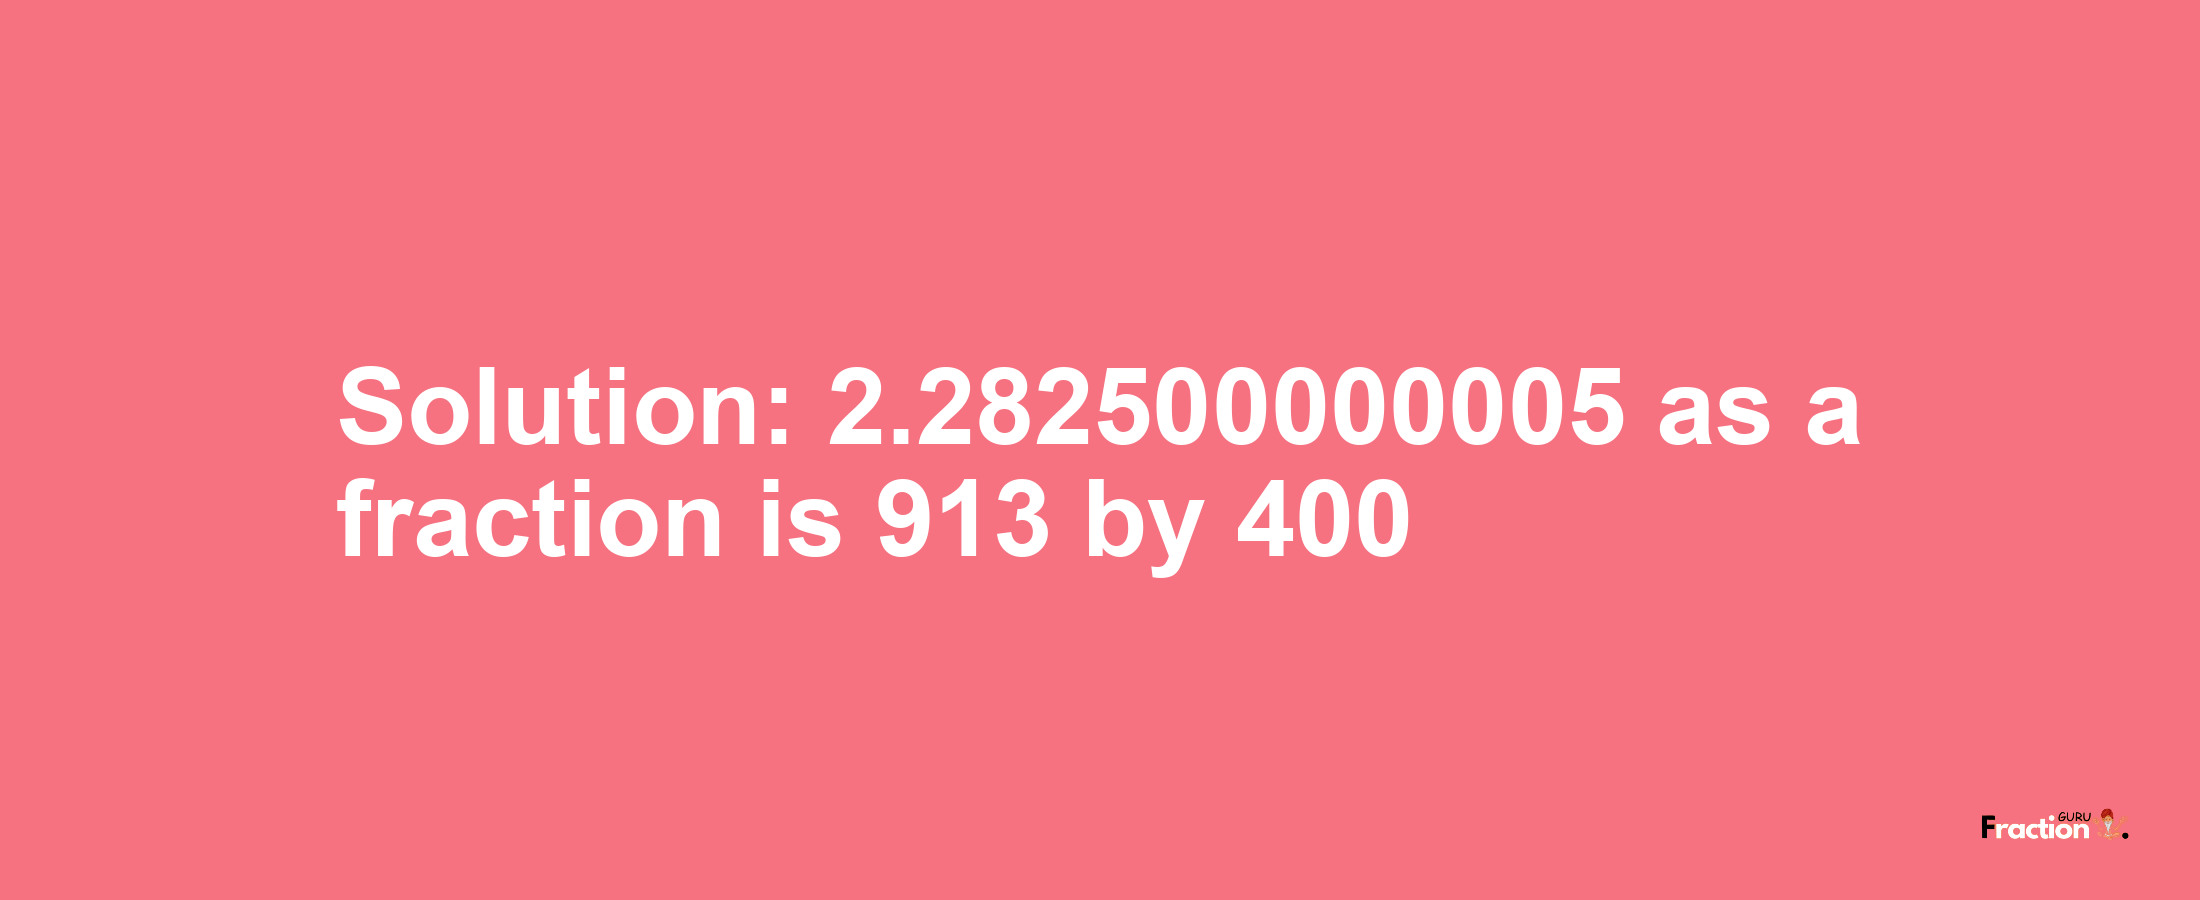 Solution:2.282500000005 as a fraction is 913/400